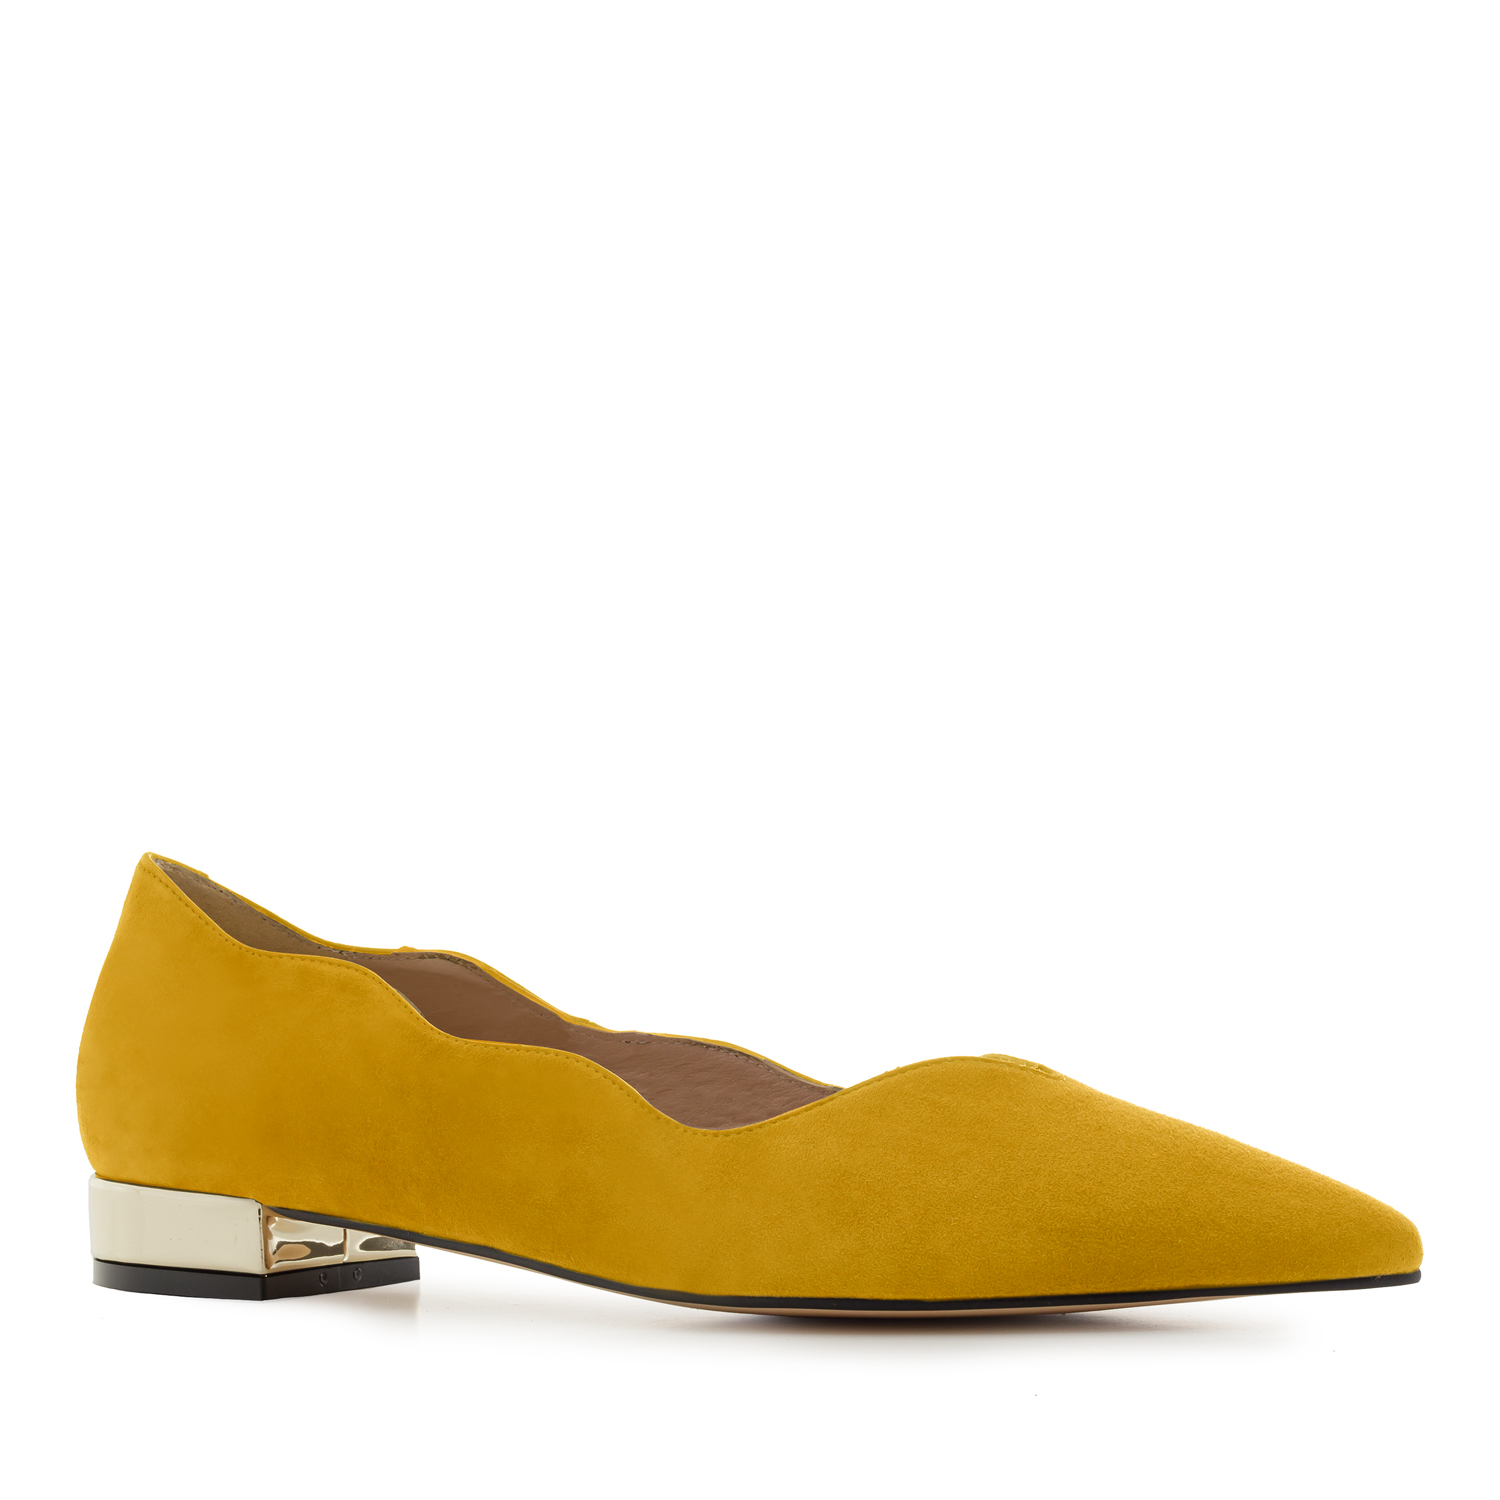 Waved Upper Ballet Flats in Mustard Nappa Leather 